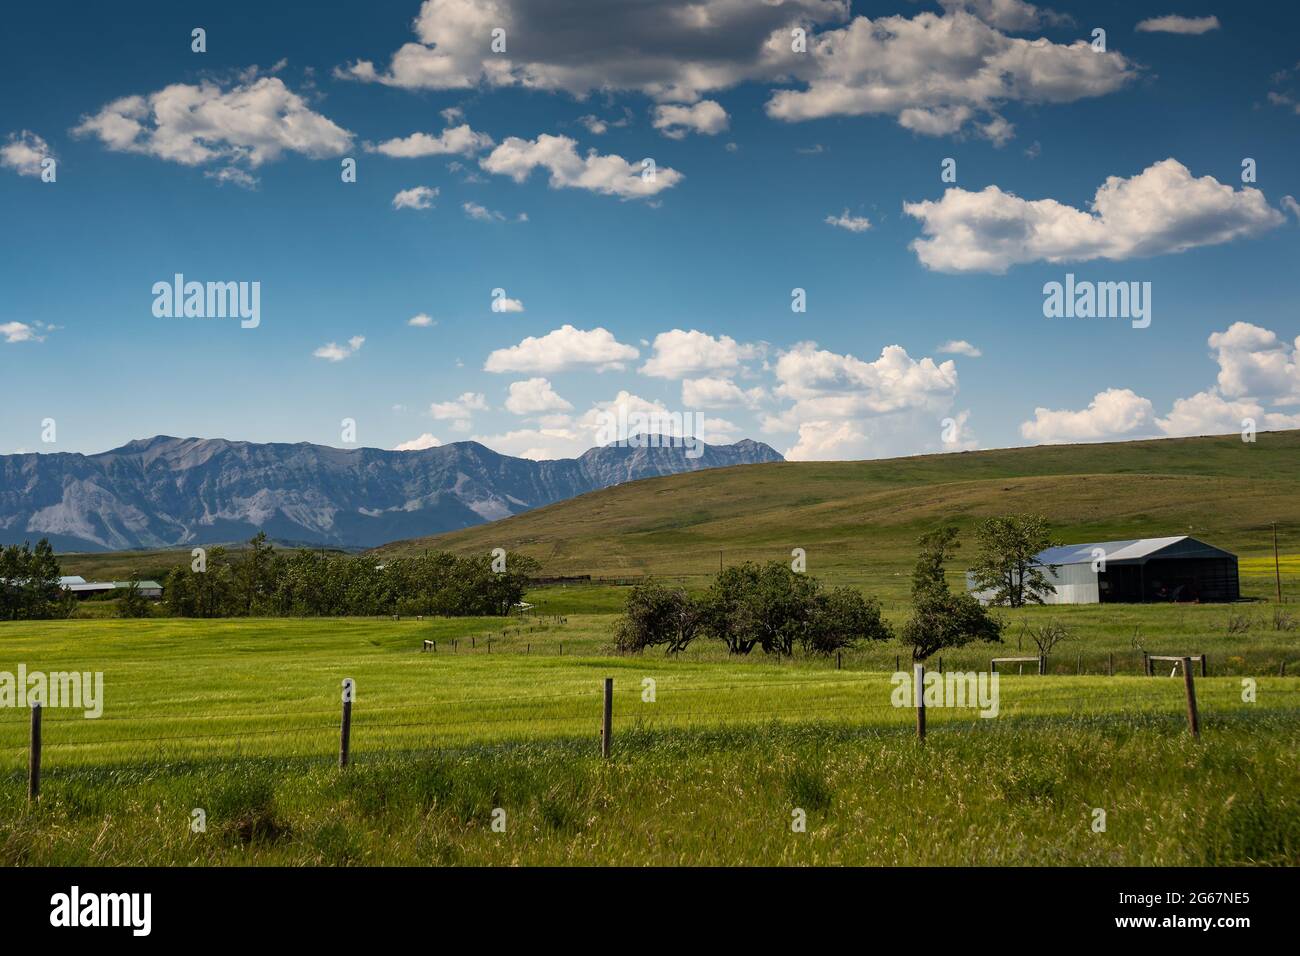 A ranching farm along the Eastern slopes of the Canadian Rocky Mountains and future coal mining development. Stock Photo